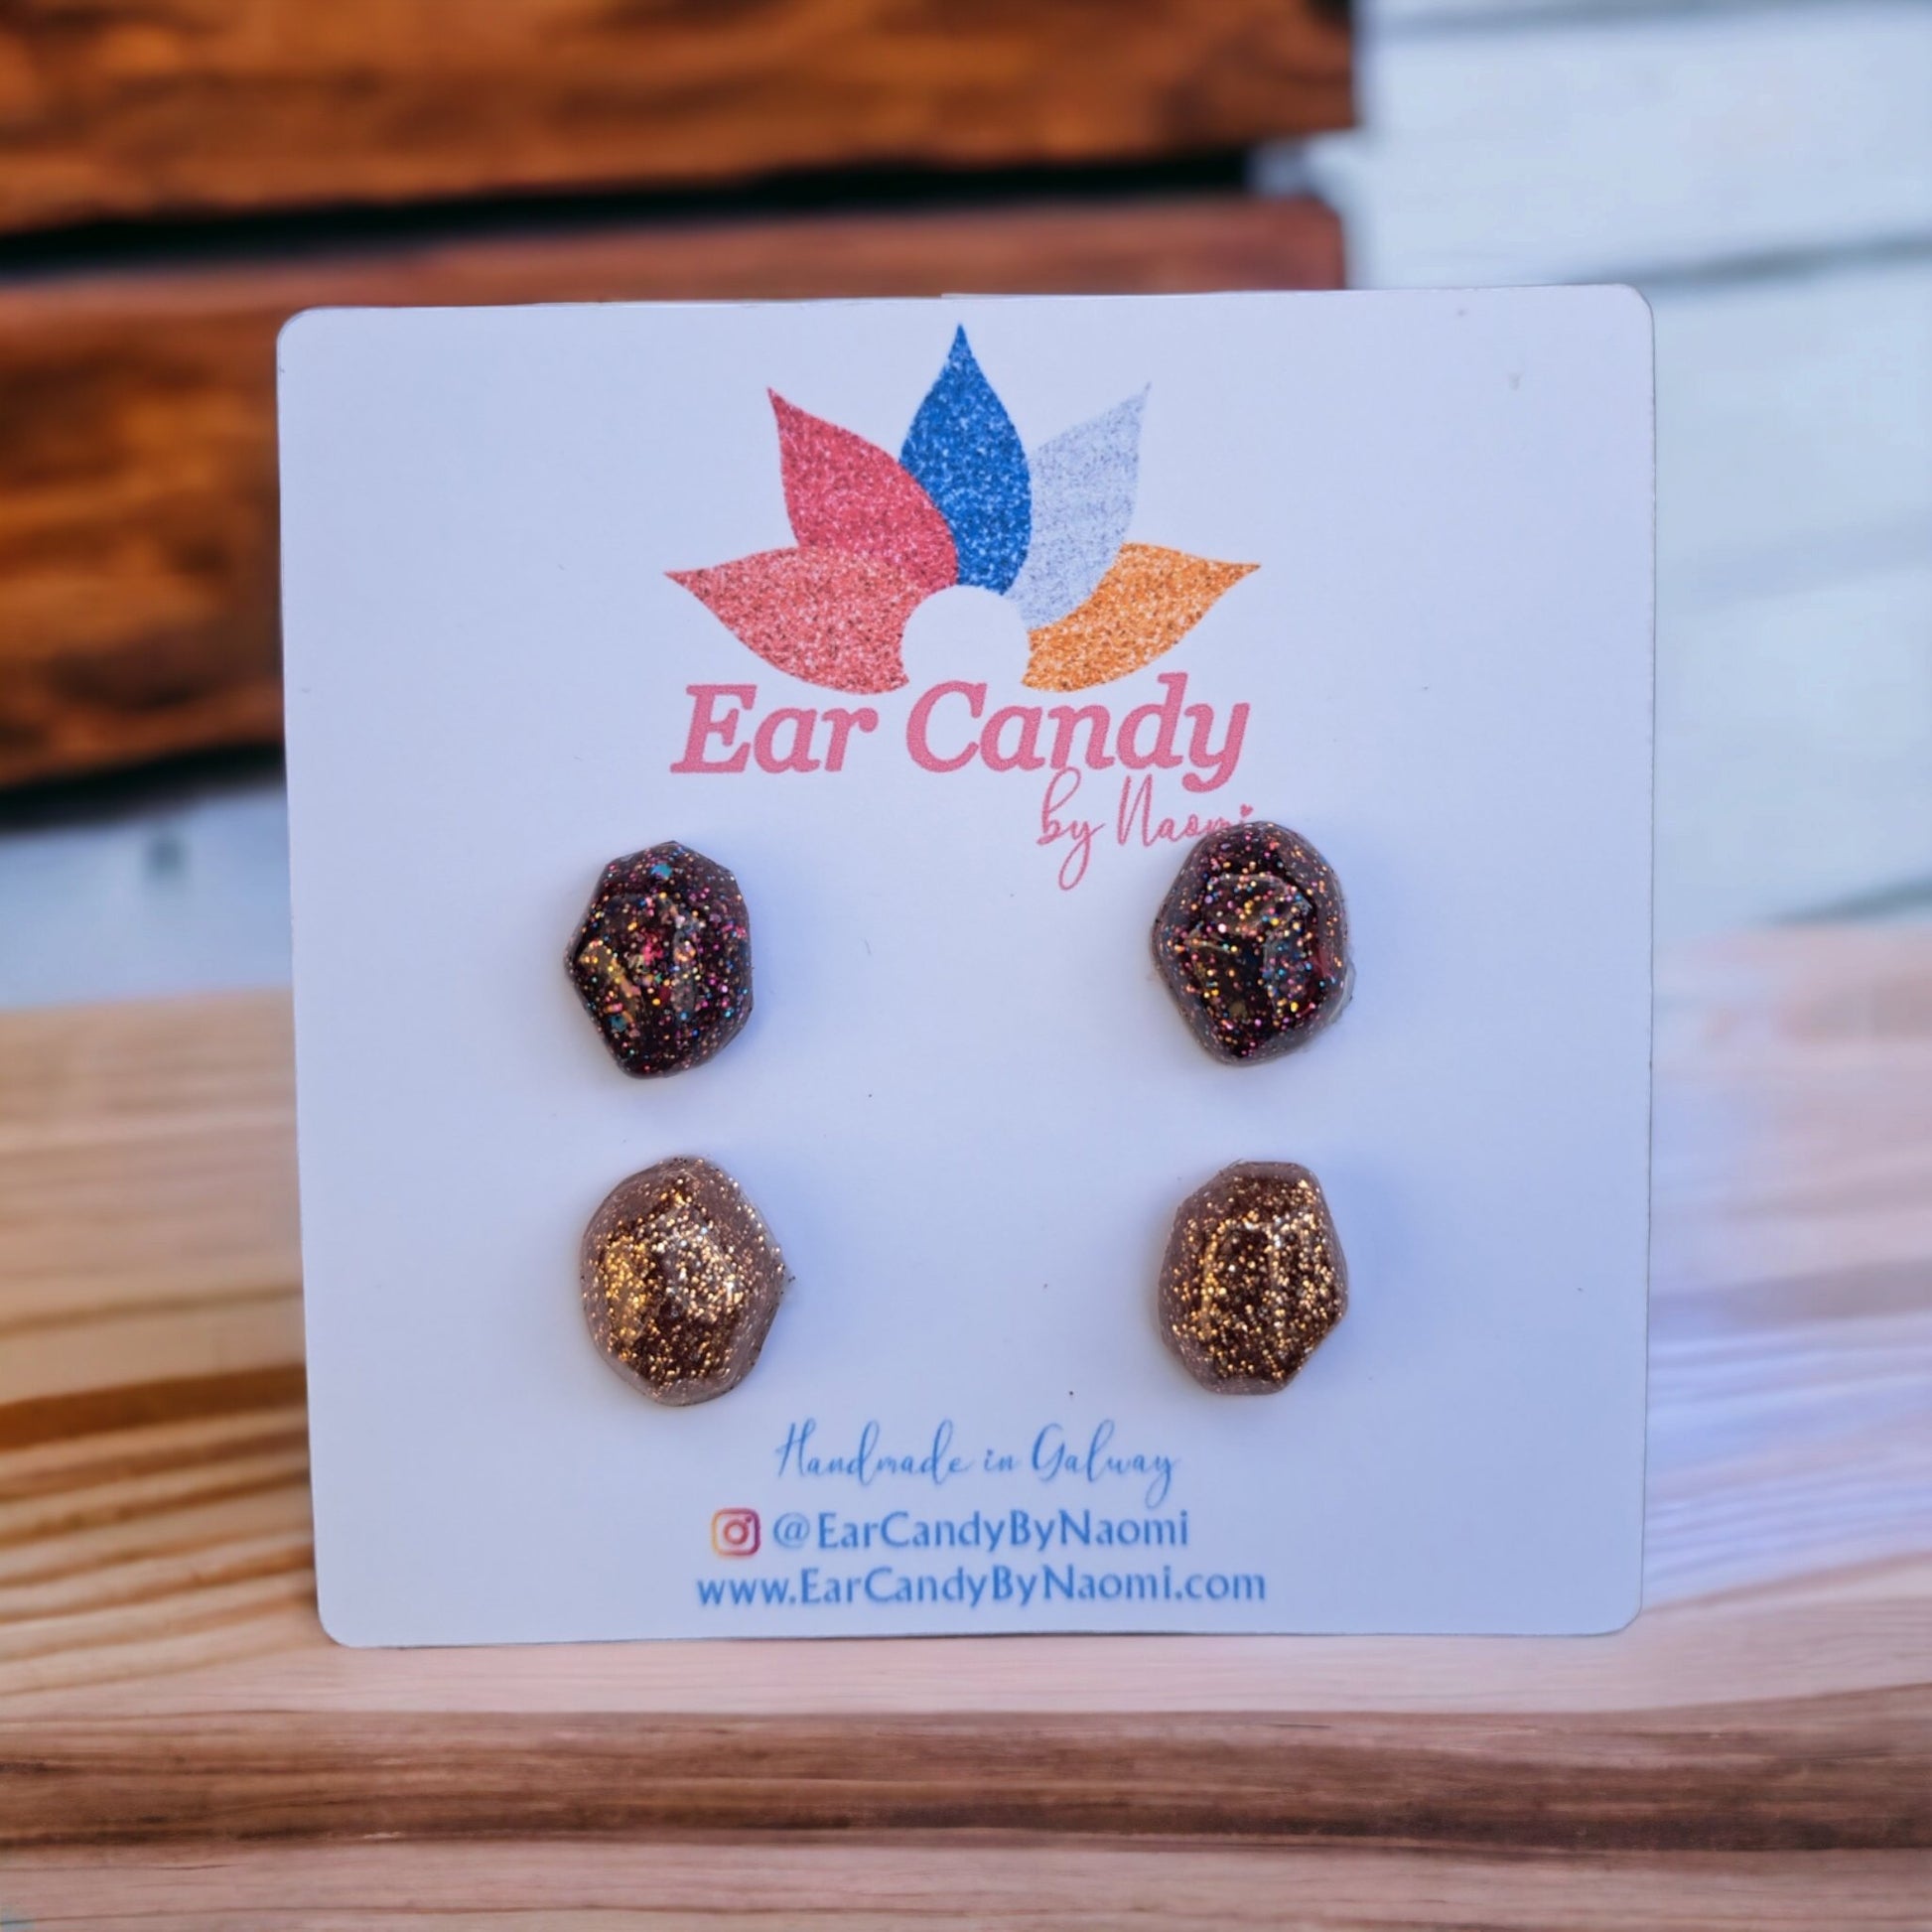 Skittle Studs bronze & gold shimmer - Ear Candy by Naomi Skittle Studs bronze & gold shimmer